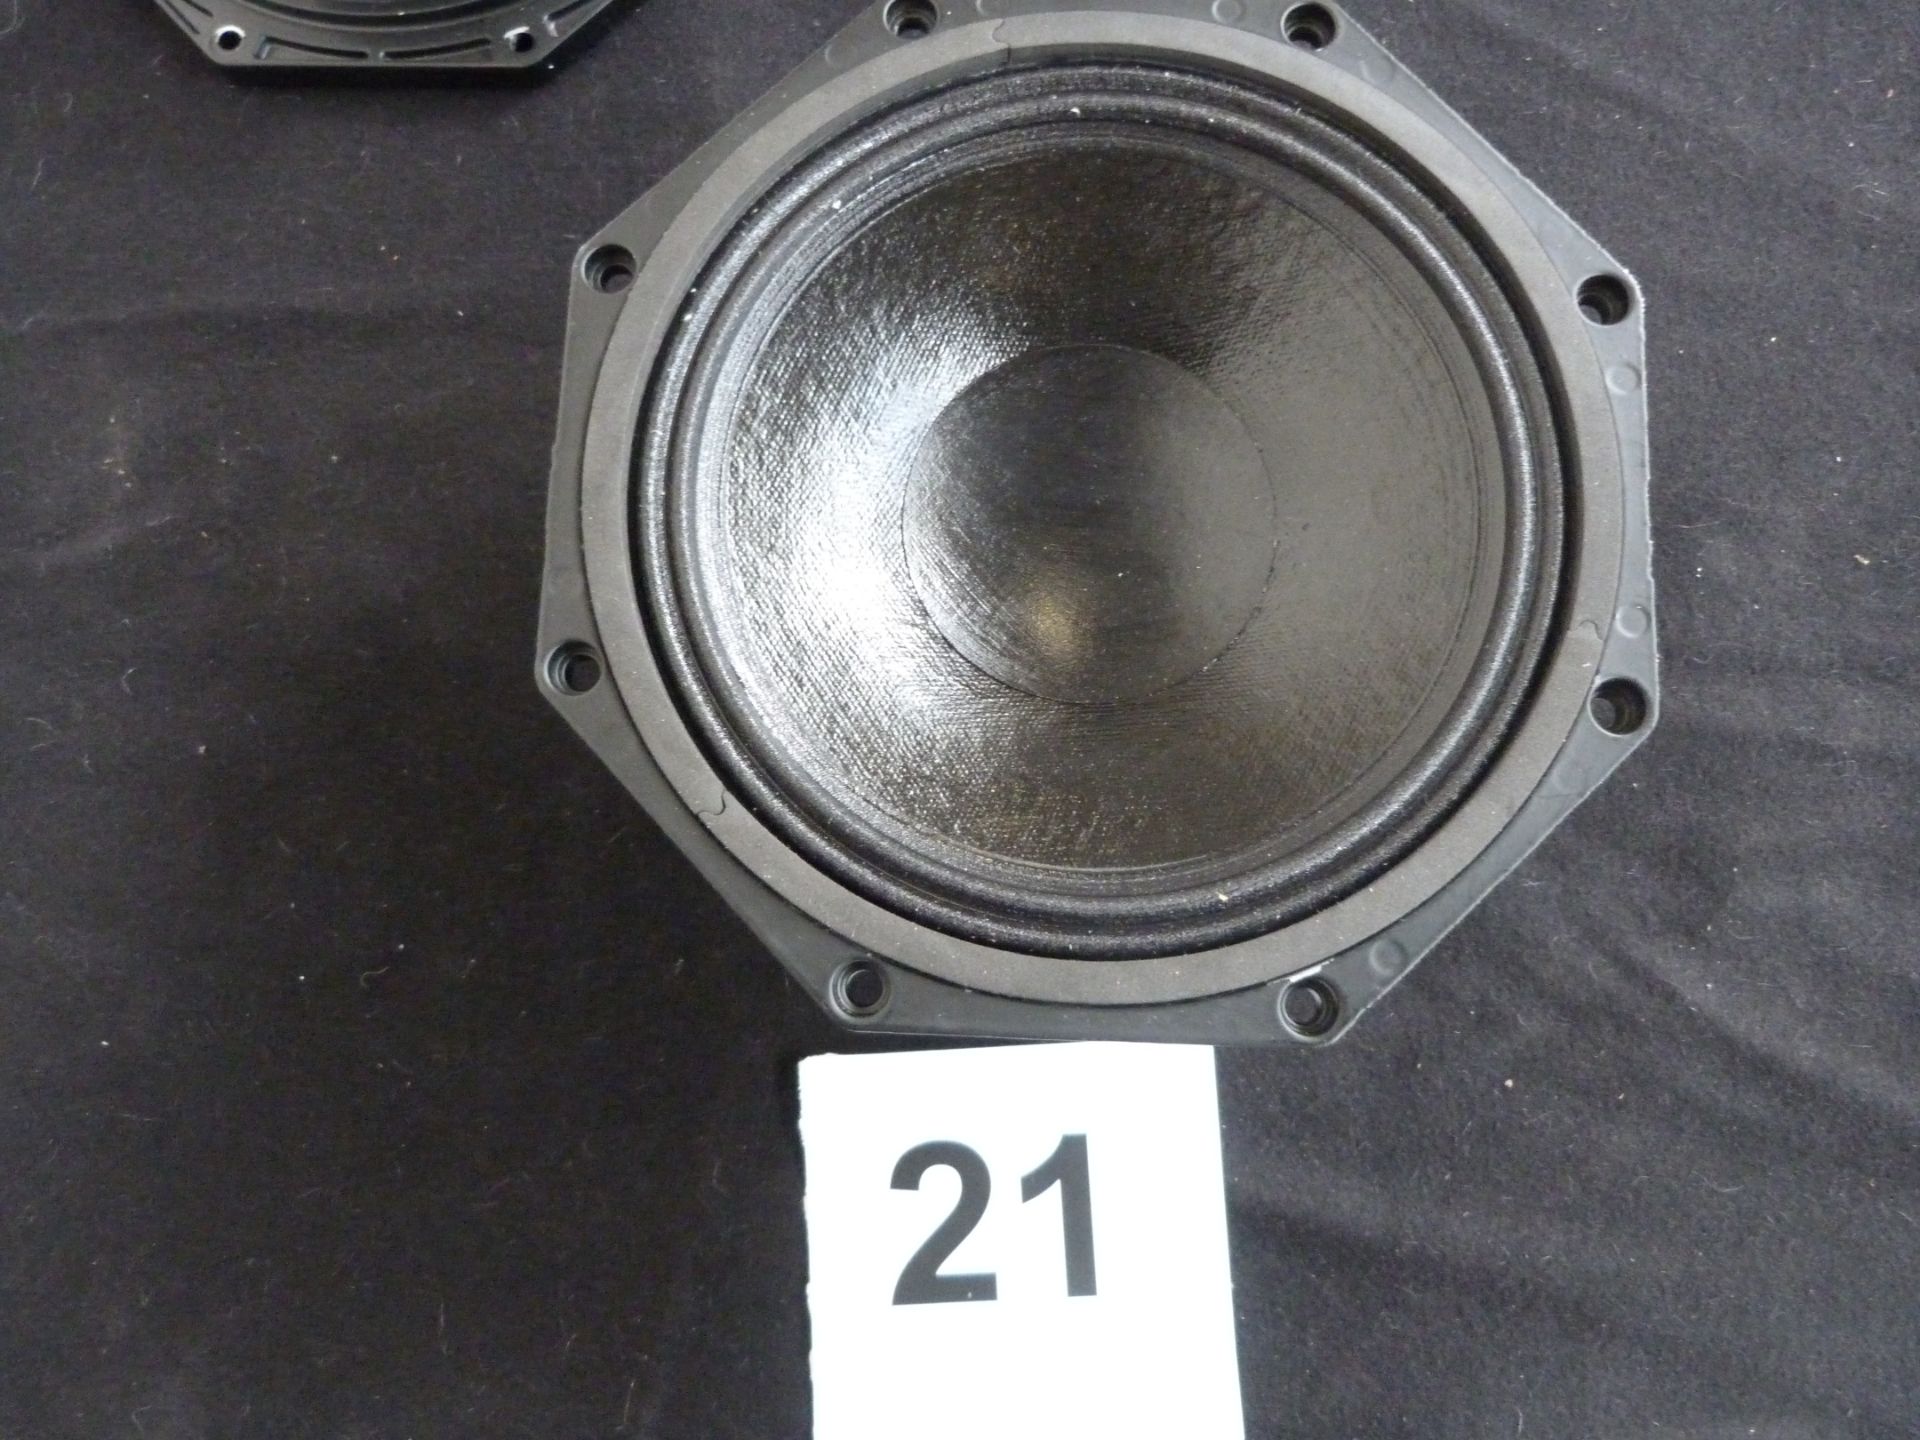 4x Martin Audio DLS 8002 16 Ohm 8" MF Driver For W8LM. Ex-hire/Working, Re-coned 2018 - Image 3 of 11